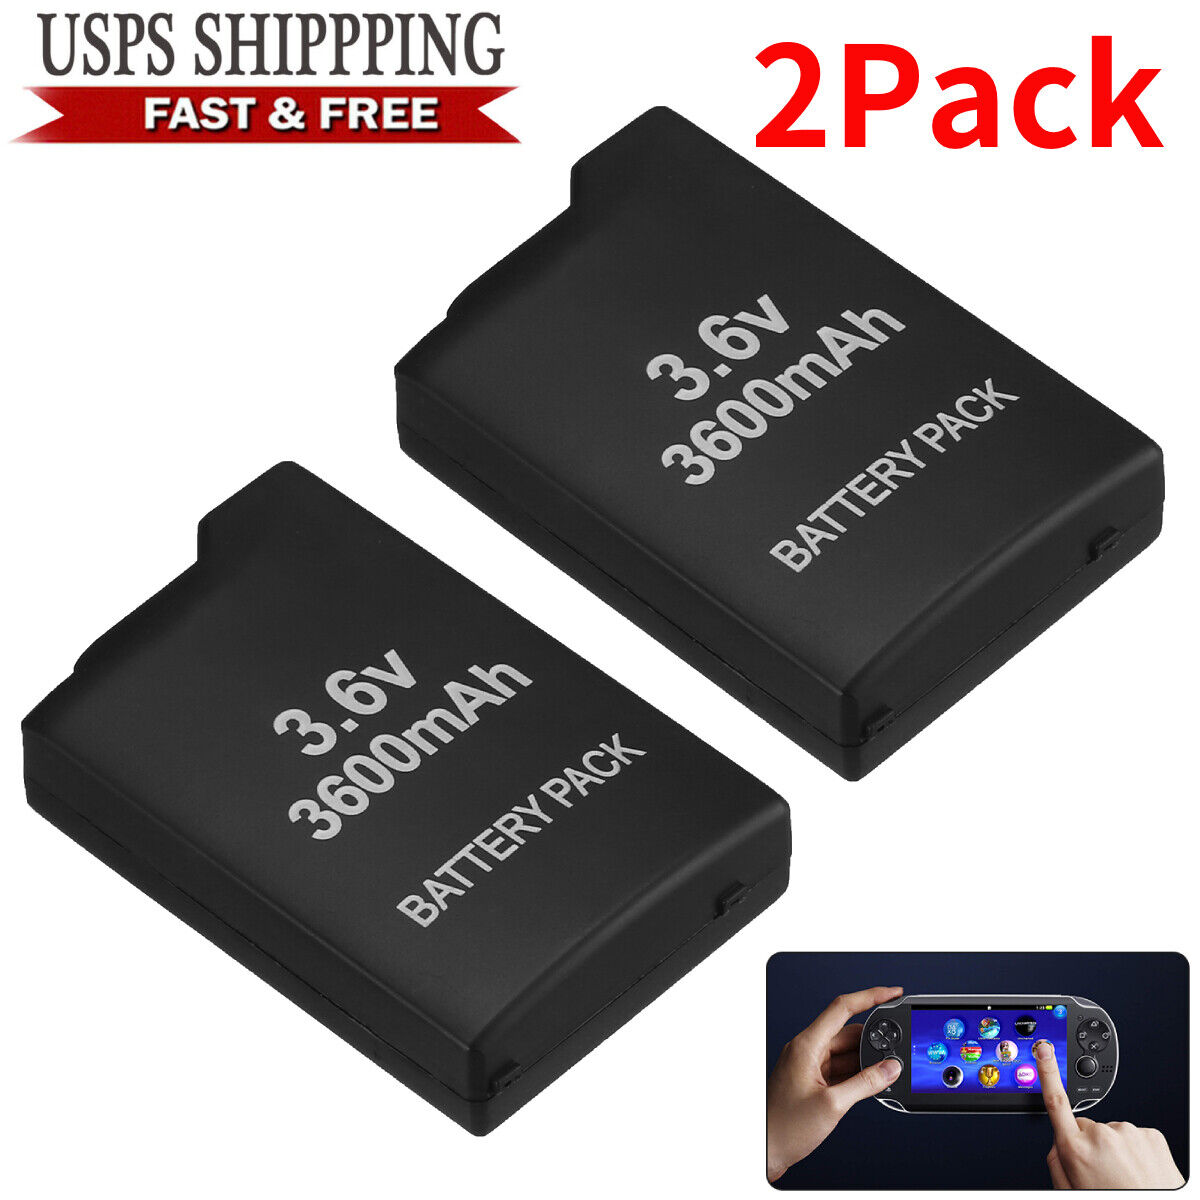 2 Pack - 3600mAh Replacement Battery Packs for Sony PSP PSP-1000 1000 1001 Unbranded Does not apply